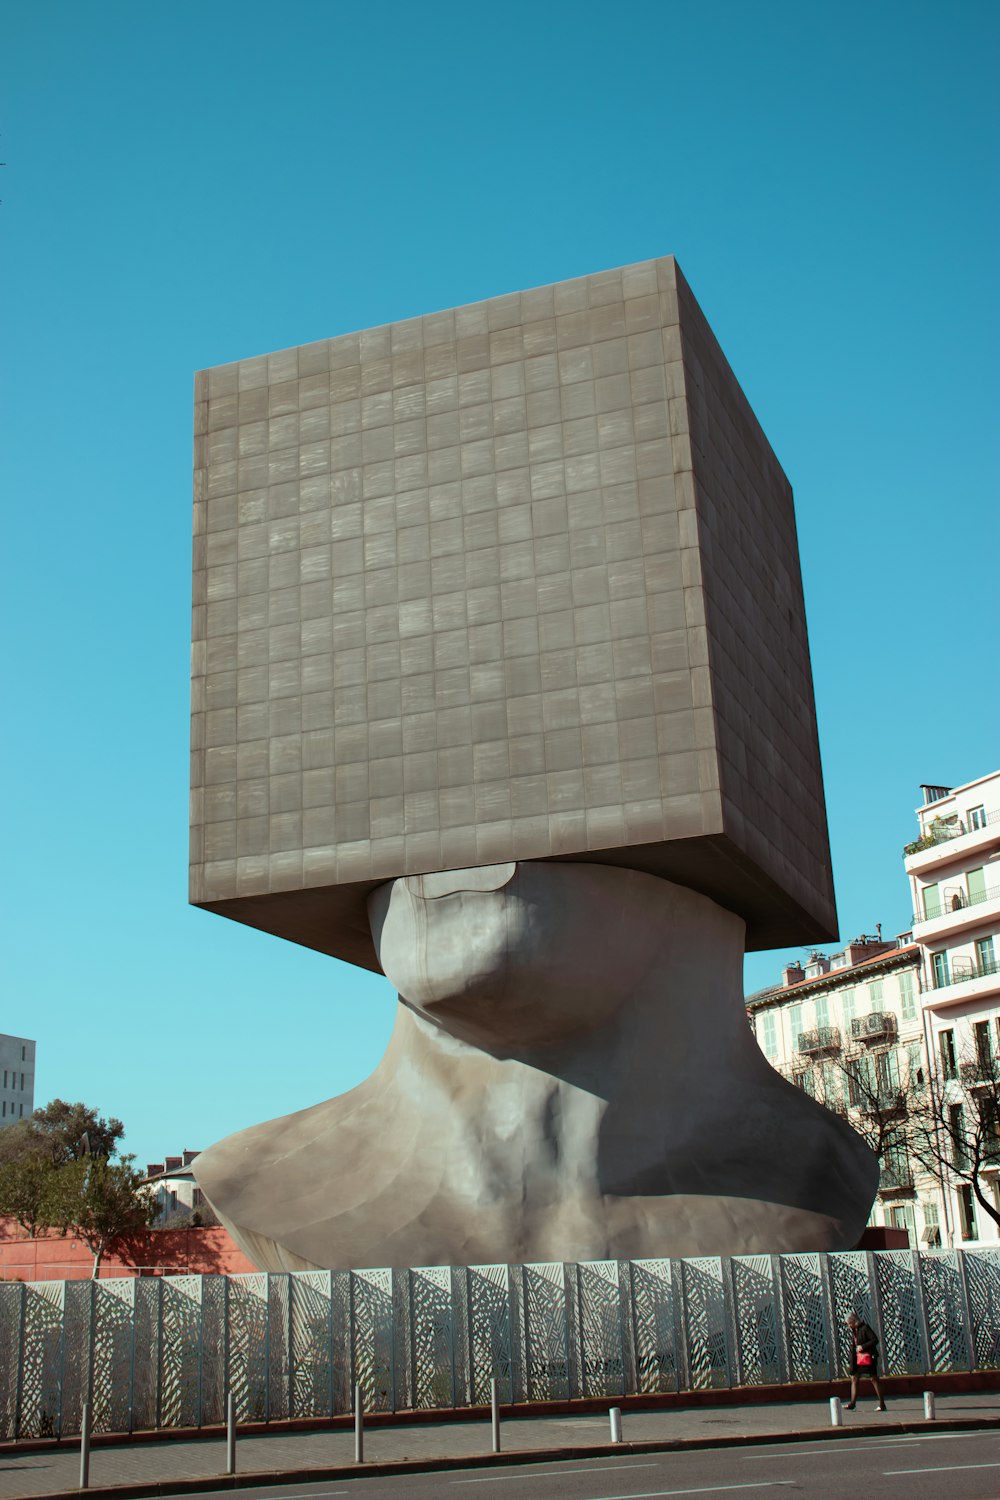 a large sculpture of a person's head in front of a building